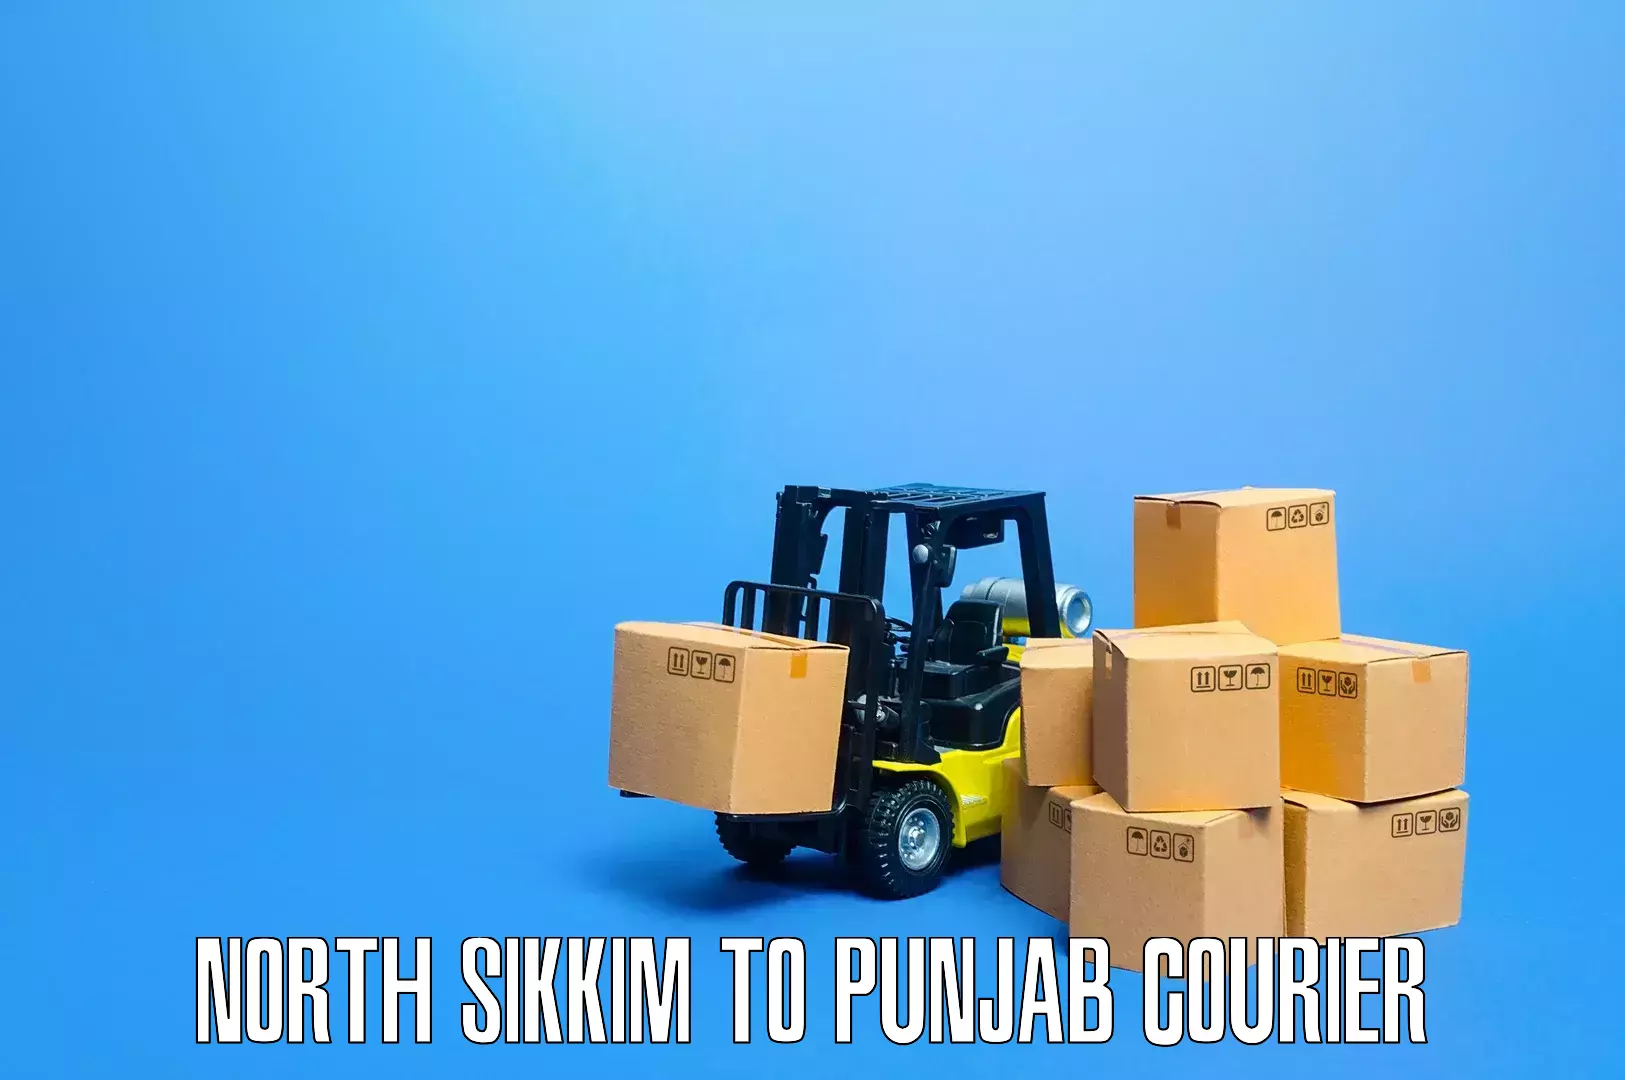 Professional moving strategies in North Sikkim to Ludhiana